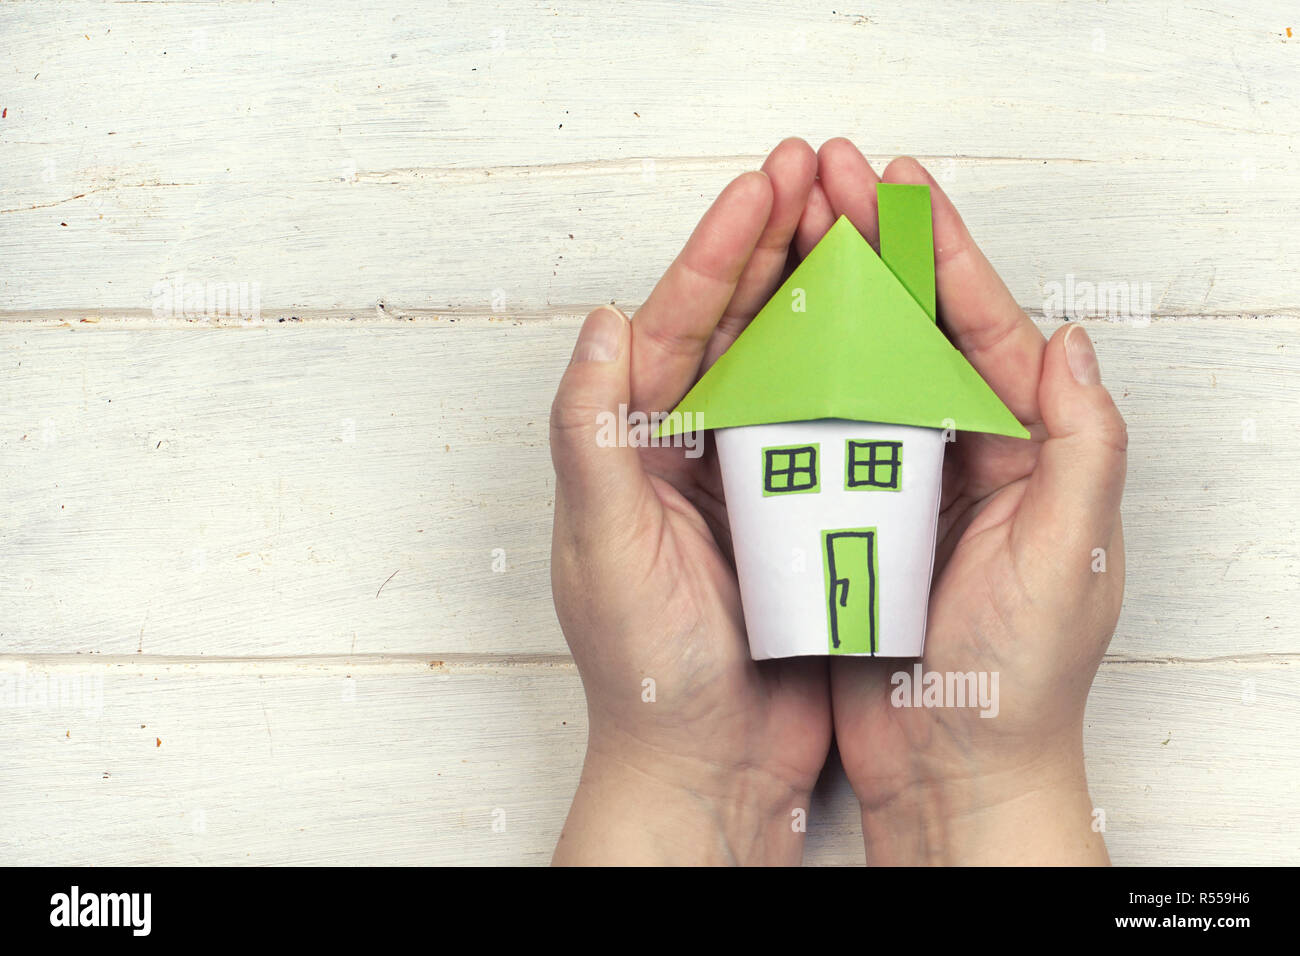 holding house in the hands Stock Photo